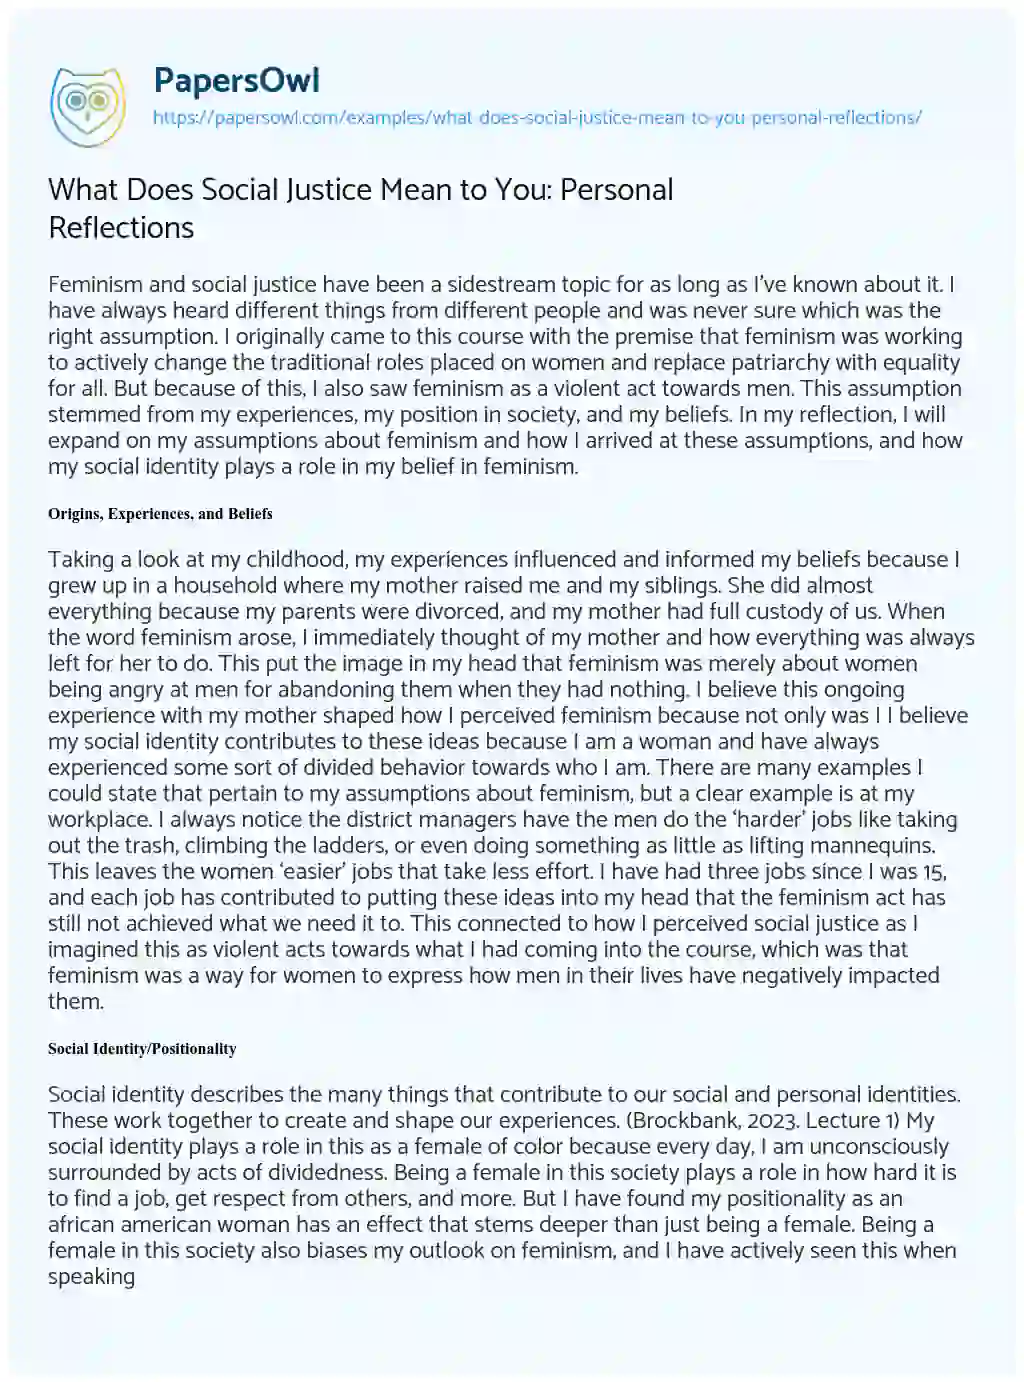 Essay on What does Social Justice Mean to You: Personal Reflections